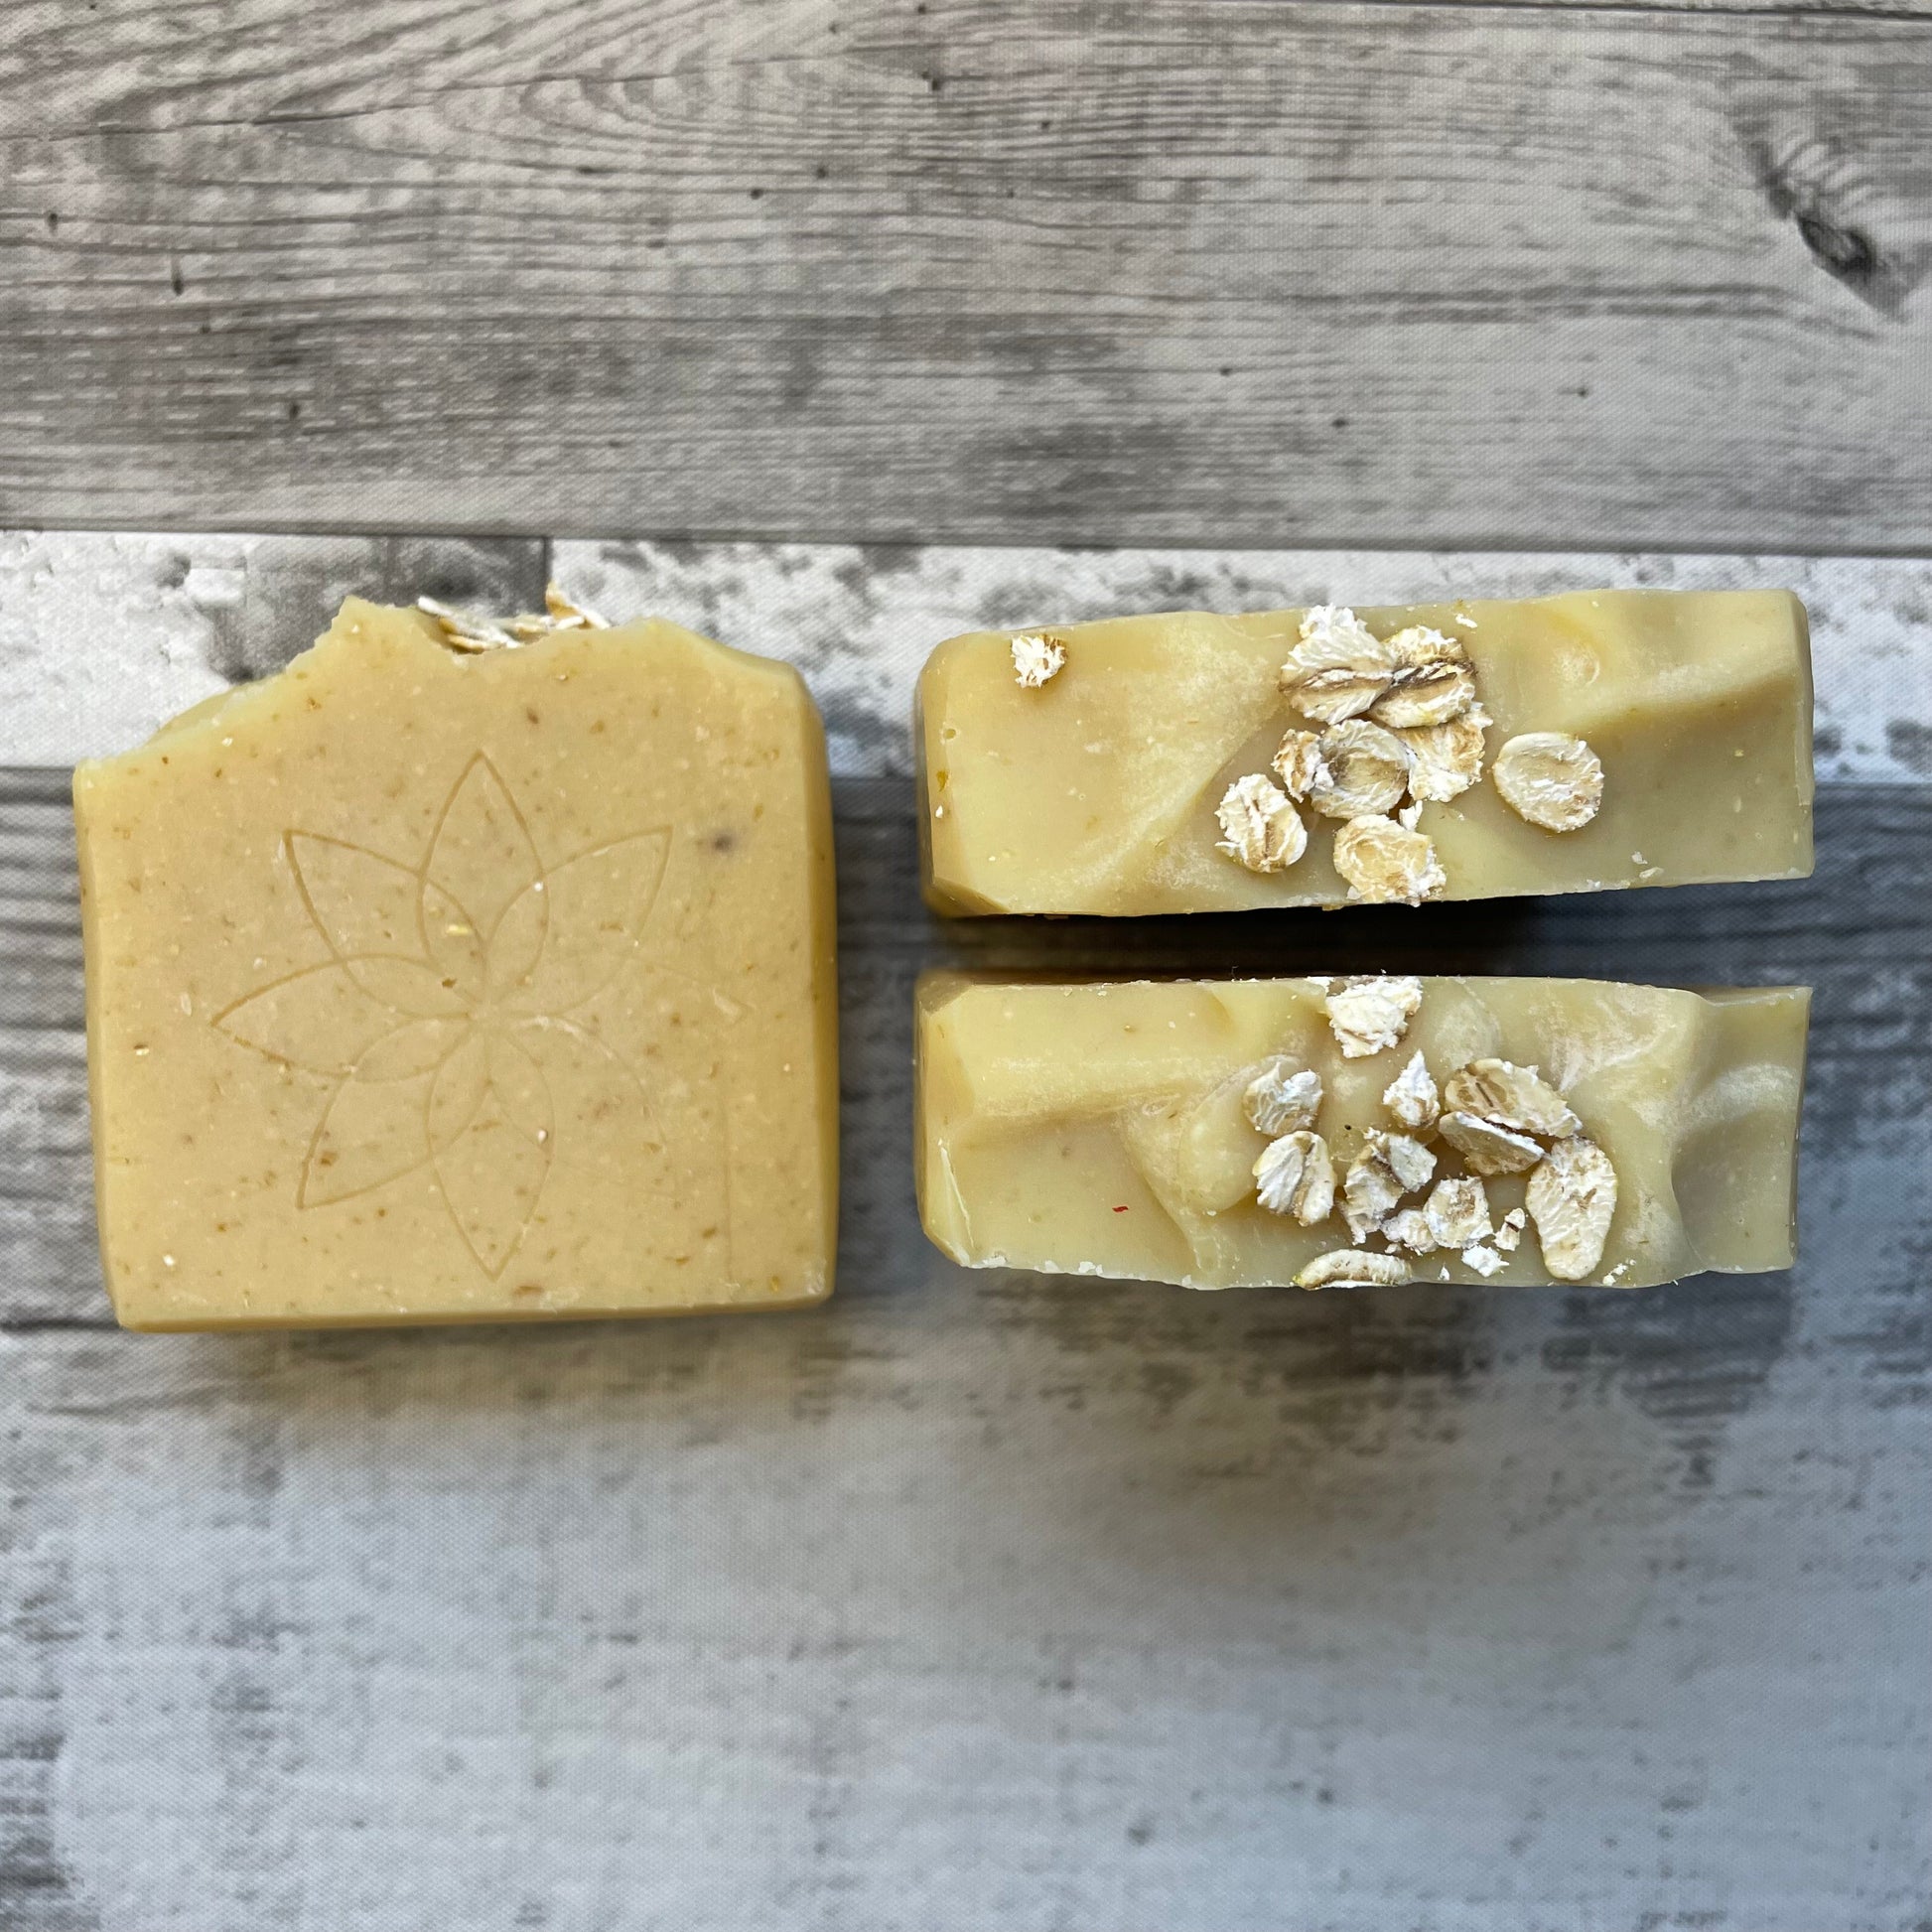 2 honey and oat handcrafted soaps to show the creamy texture of the top and the front side of the soap with Basic Senses logo stamped